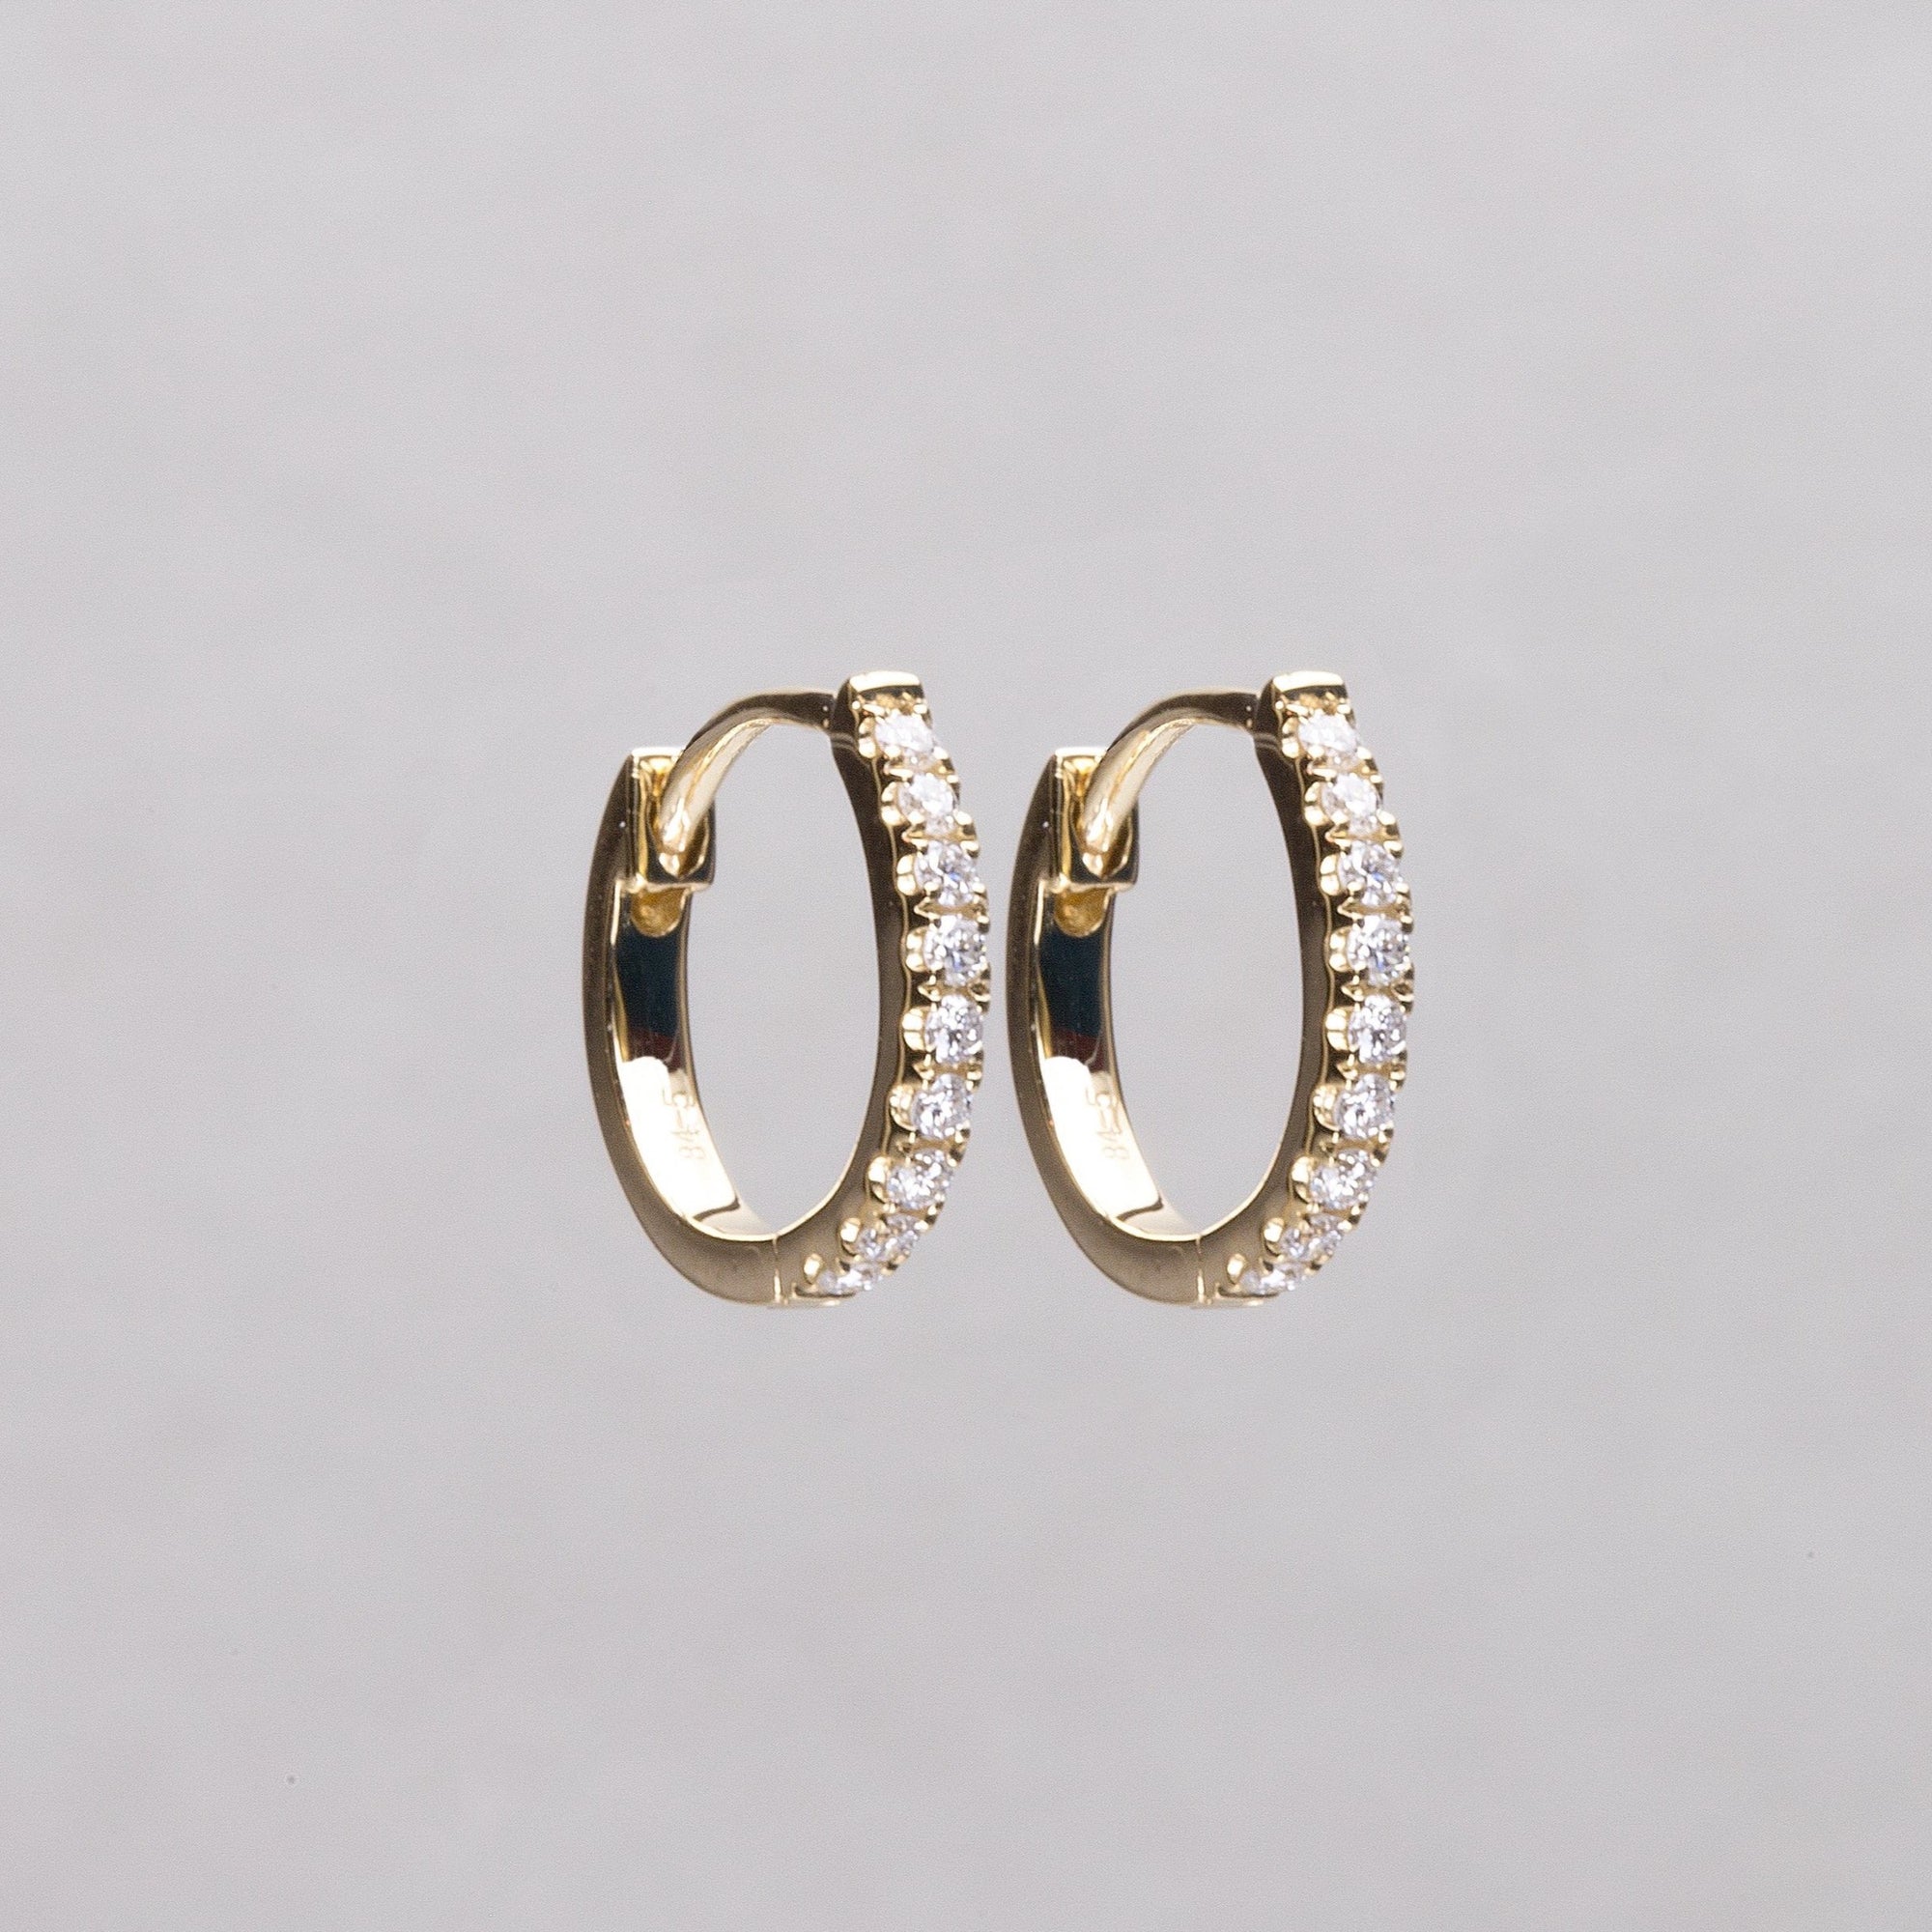 10mm round diamond hoops in 18ct yellow gold